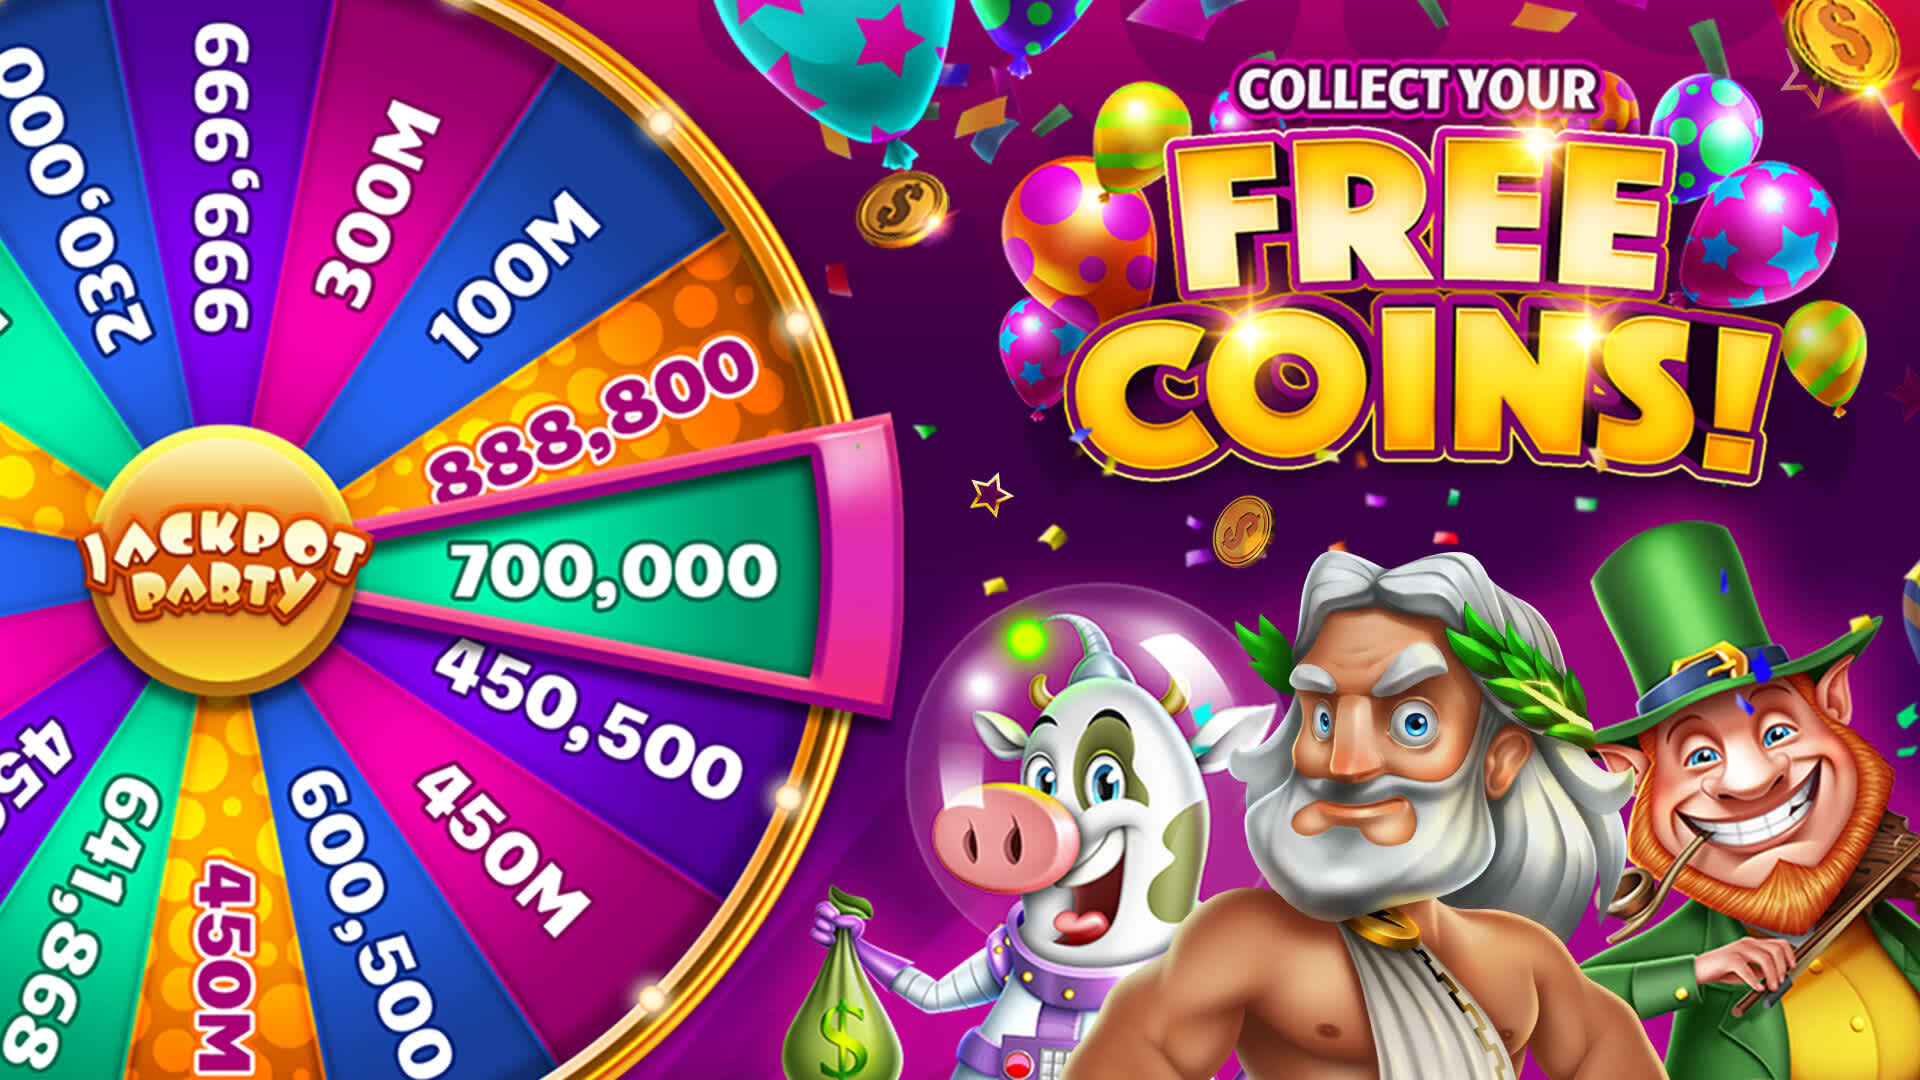 Collect your free coins - Jackpot Party Casino Screen